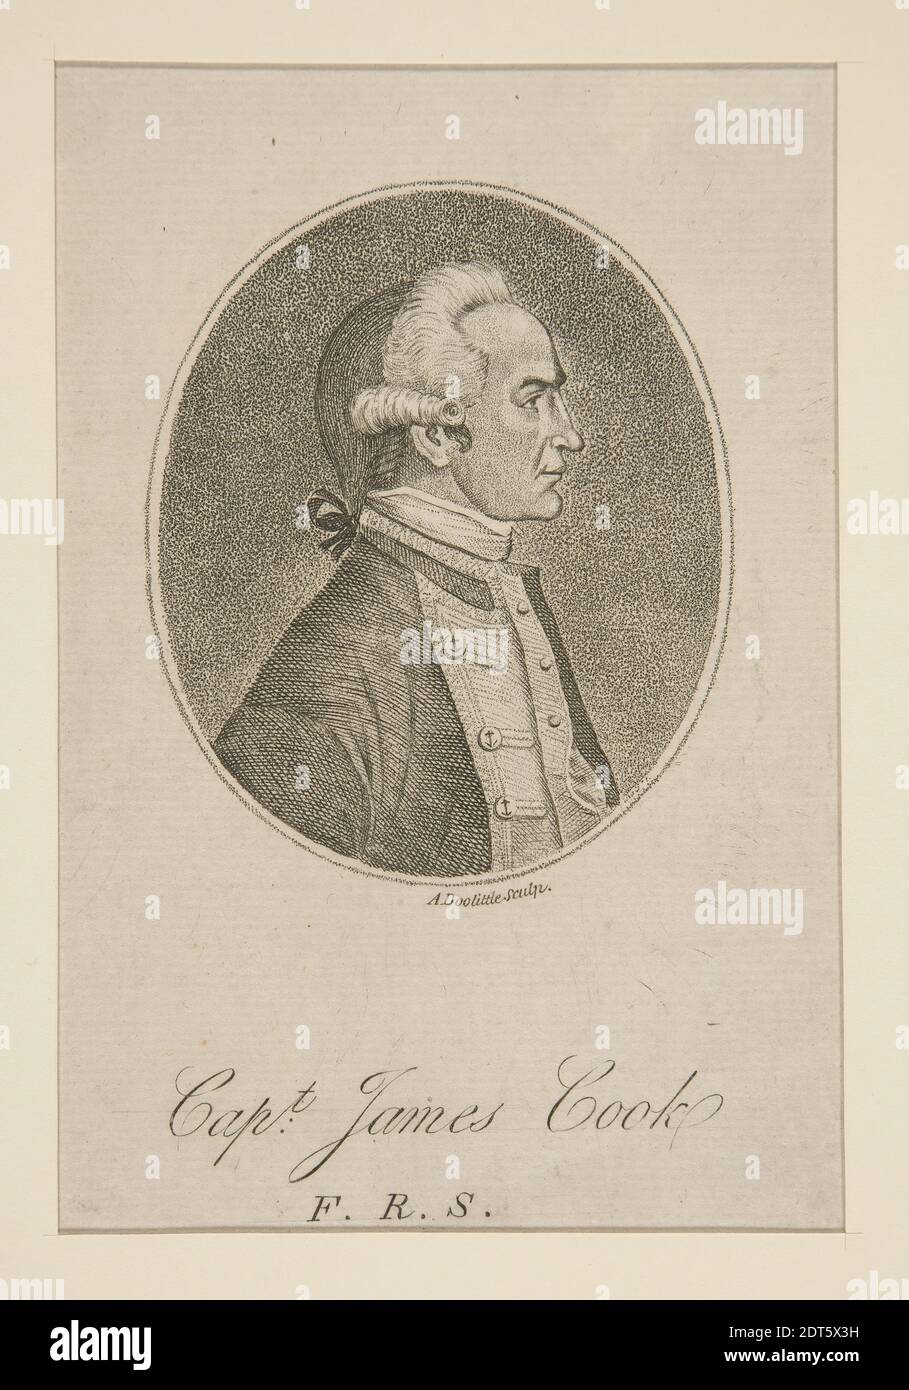 Engraver: Amos Doolittle, American, 1754–1832, Connecticut Magazine, - Captain James Cook F.R.S., Stipple engraving, black and white, sheet: 21.4 × 13 cm (8 7/16 × 5 1/8 in.), Made in United States, American, 18th century, Works on Paper - Prints Stock Photo